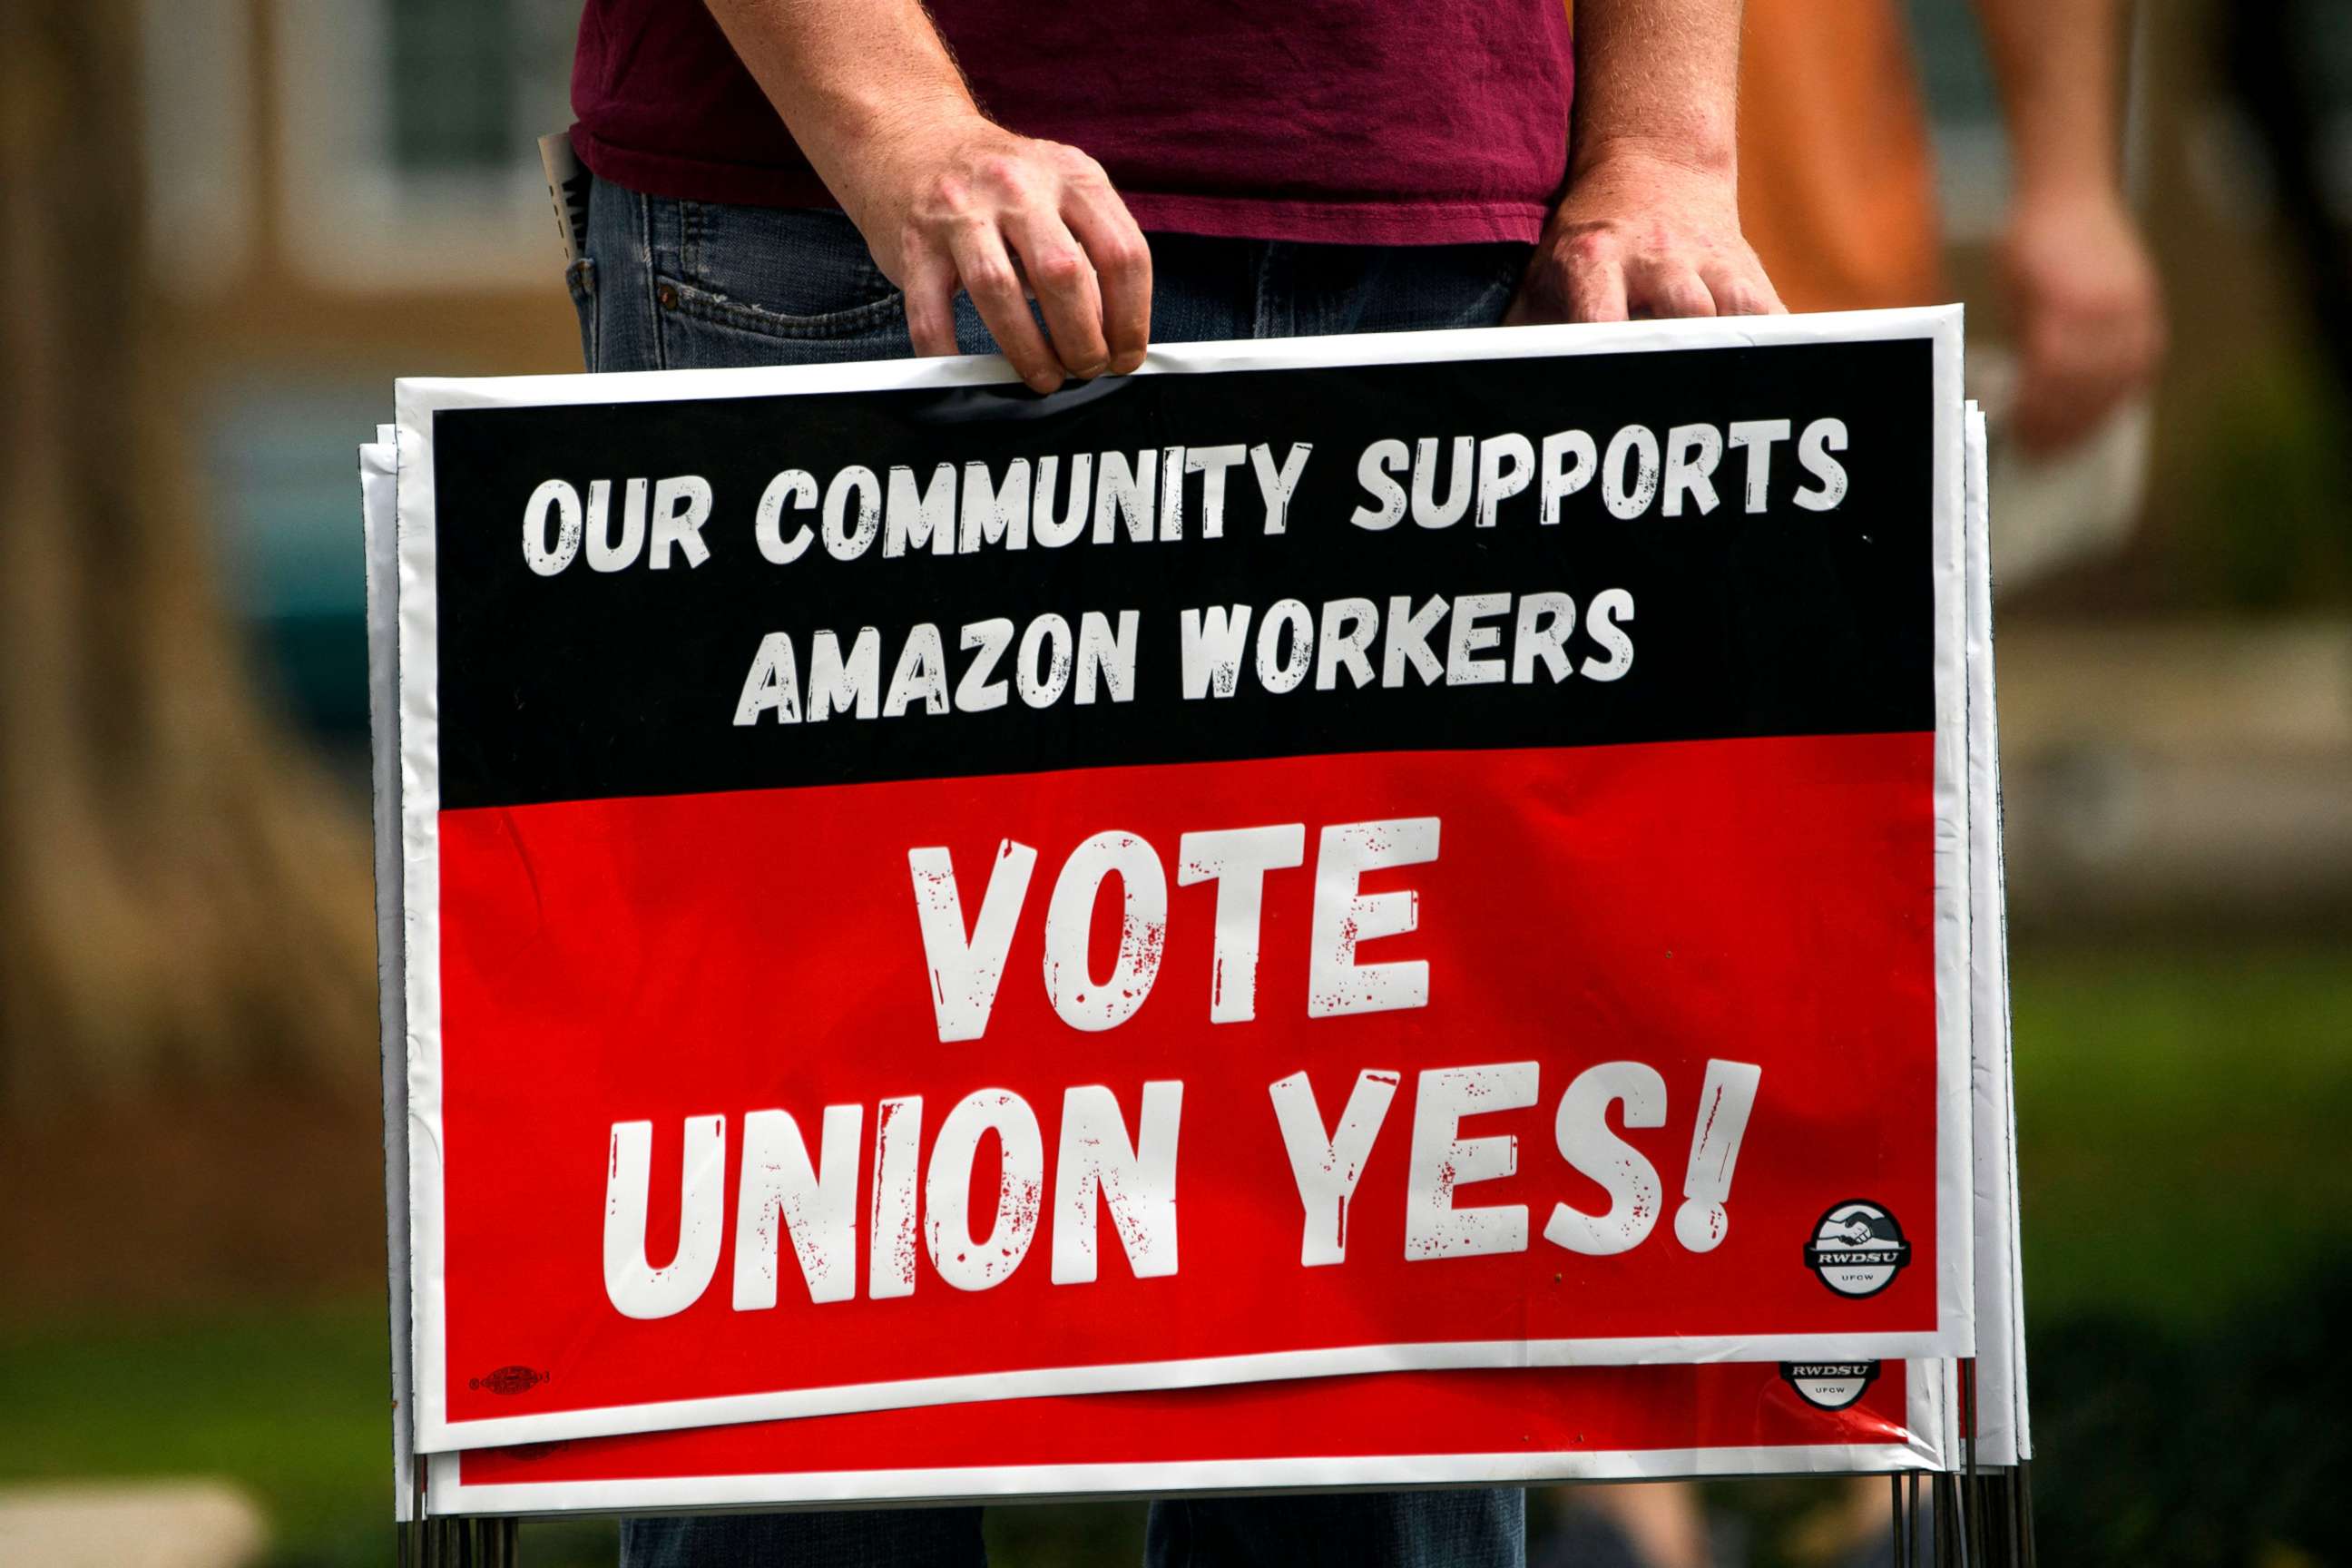 PHOTO: A person holds "Vote Union Yes!" signs during a protest in solidarity with the unionization of Amazon.com fulfillment center workers at Kelly Ingram Park on March 27, 2021 in Birmingham, Ala.